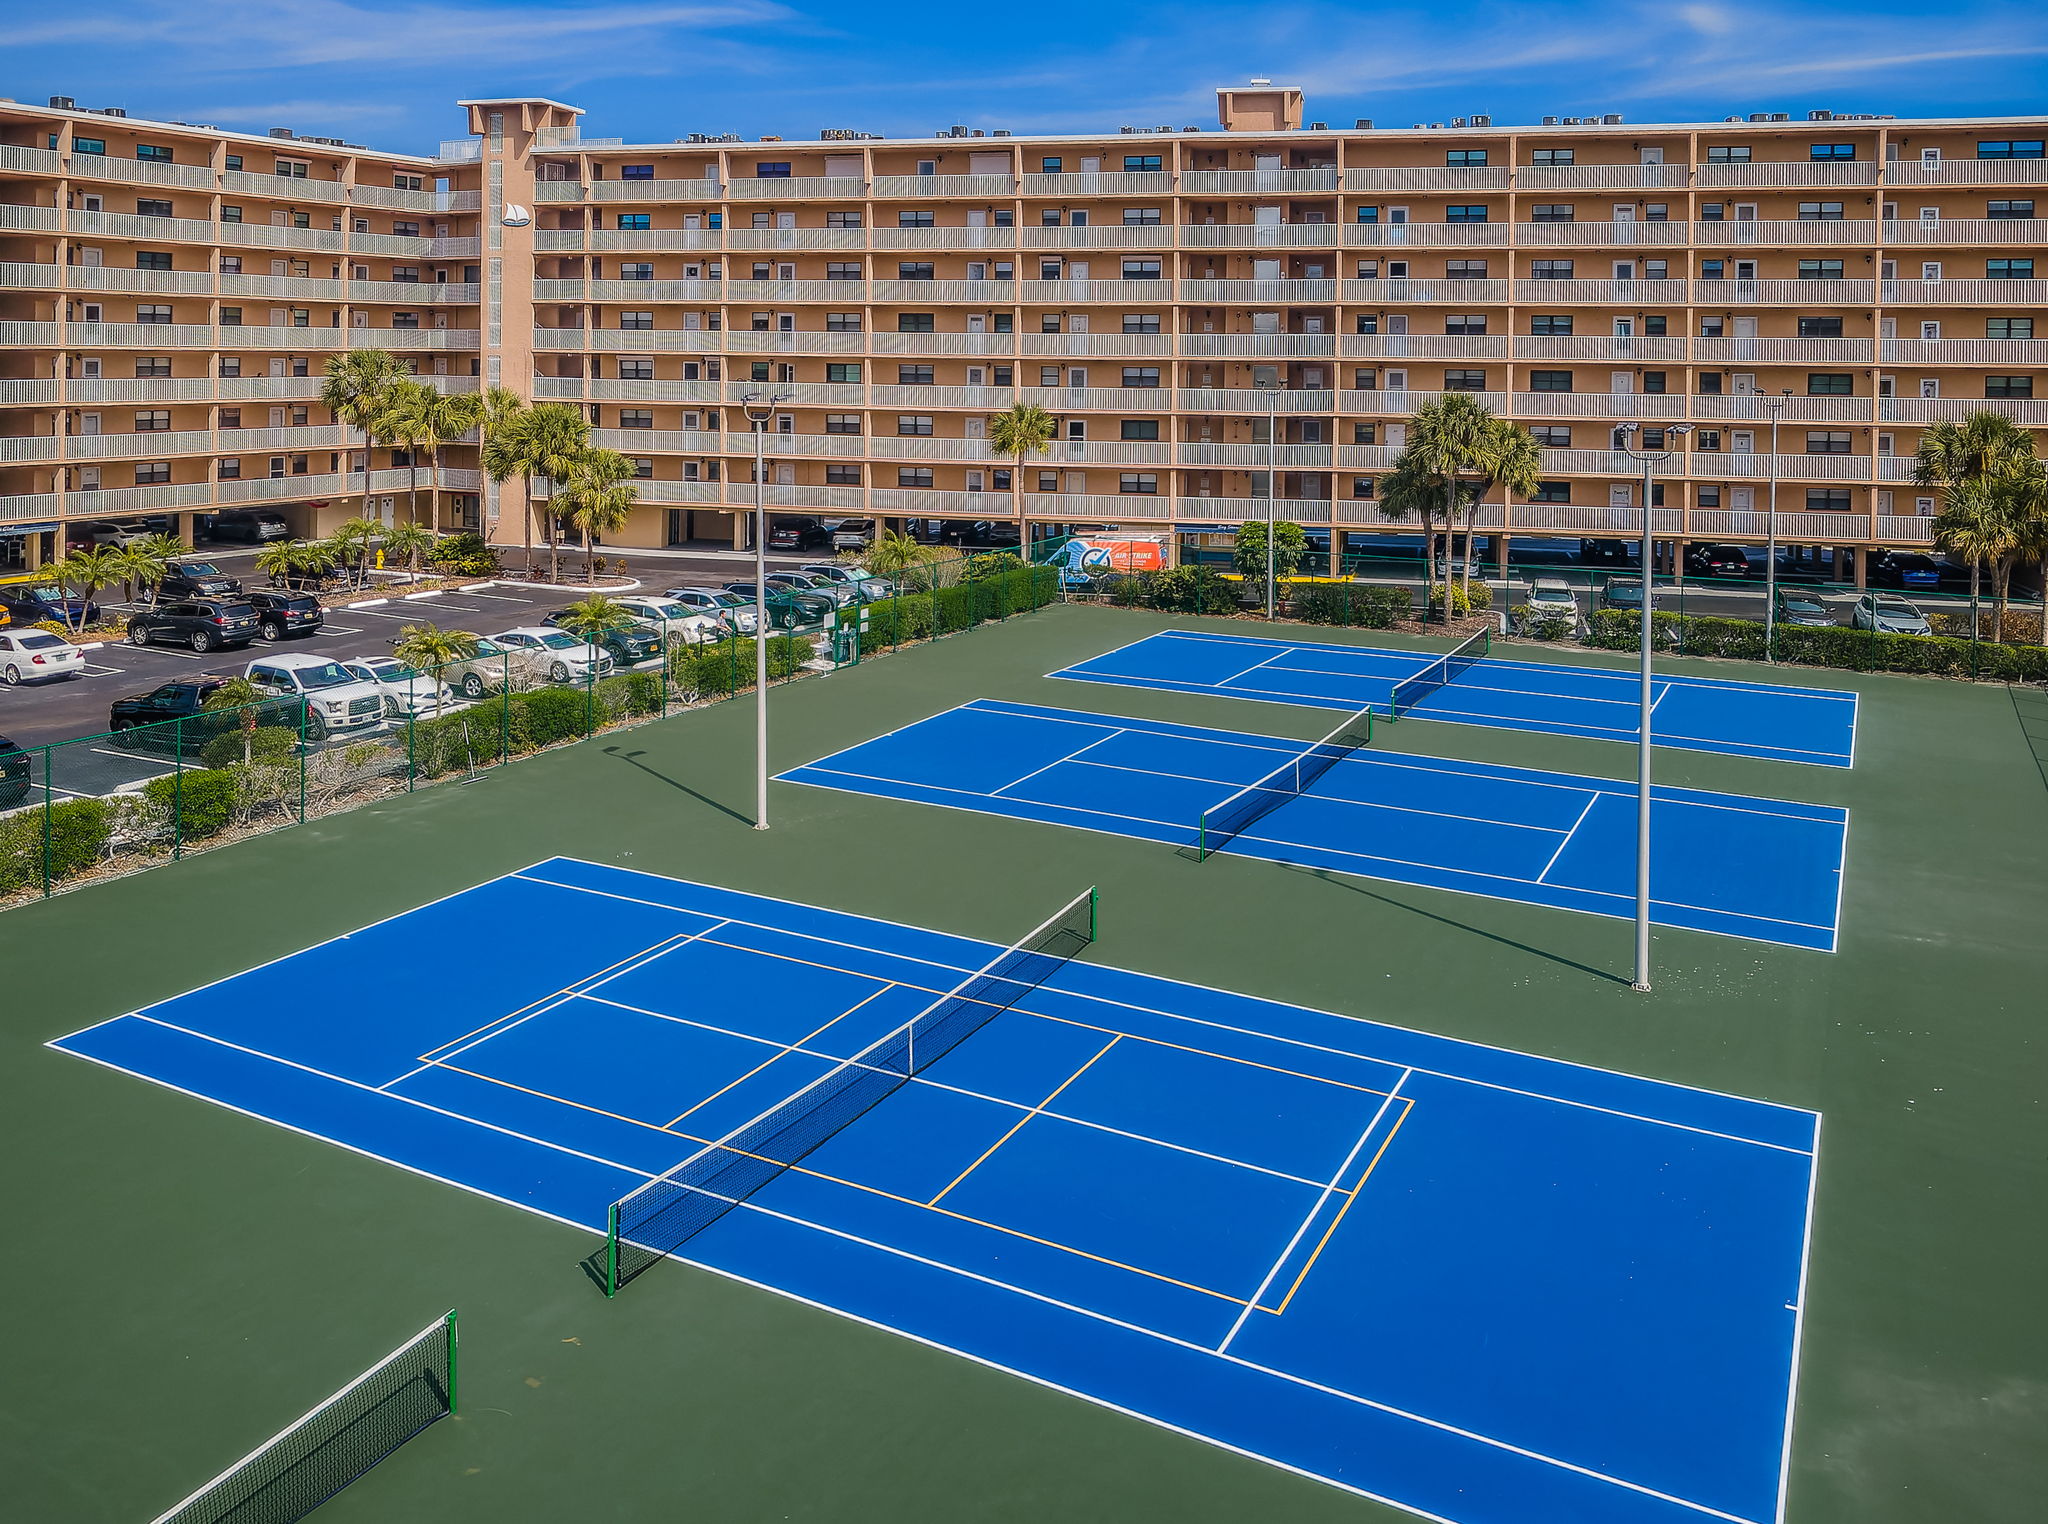 25-Tennis and Pickleball Courts26